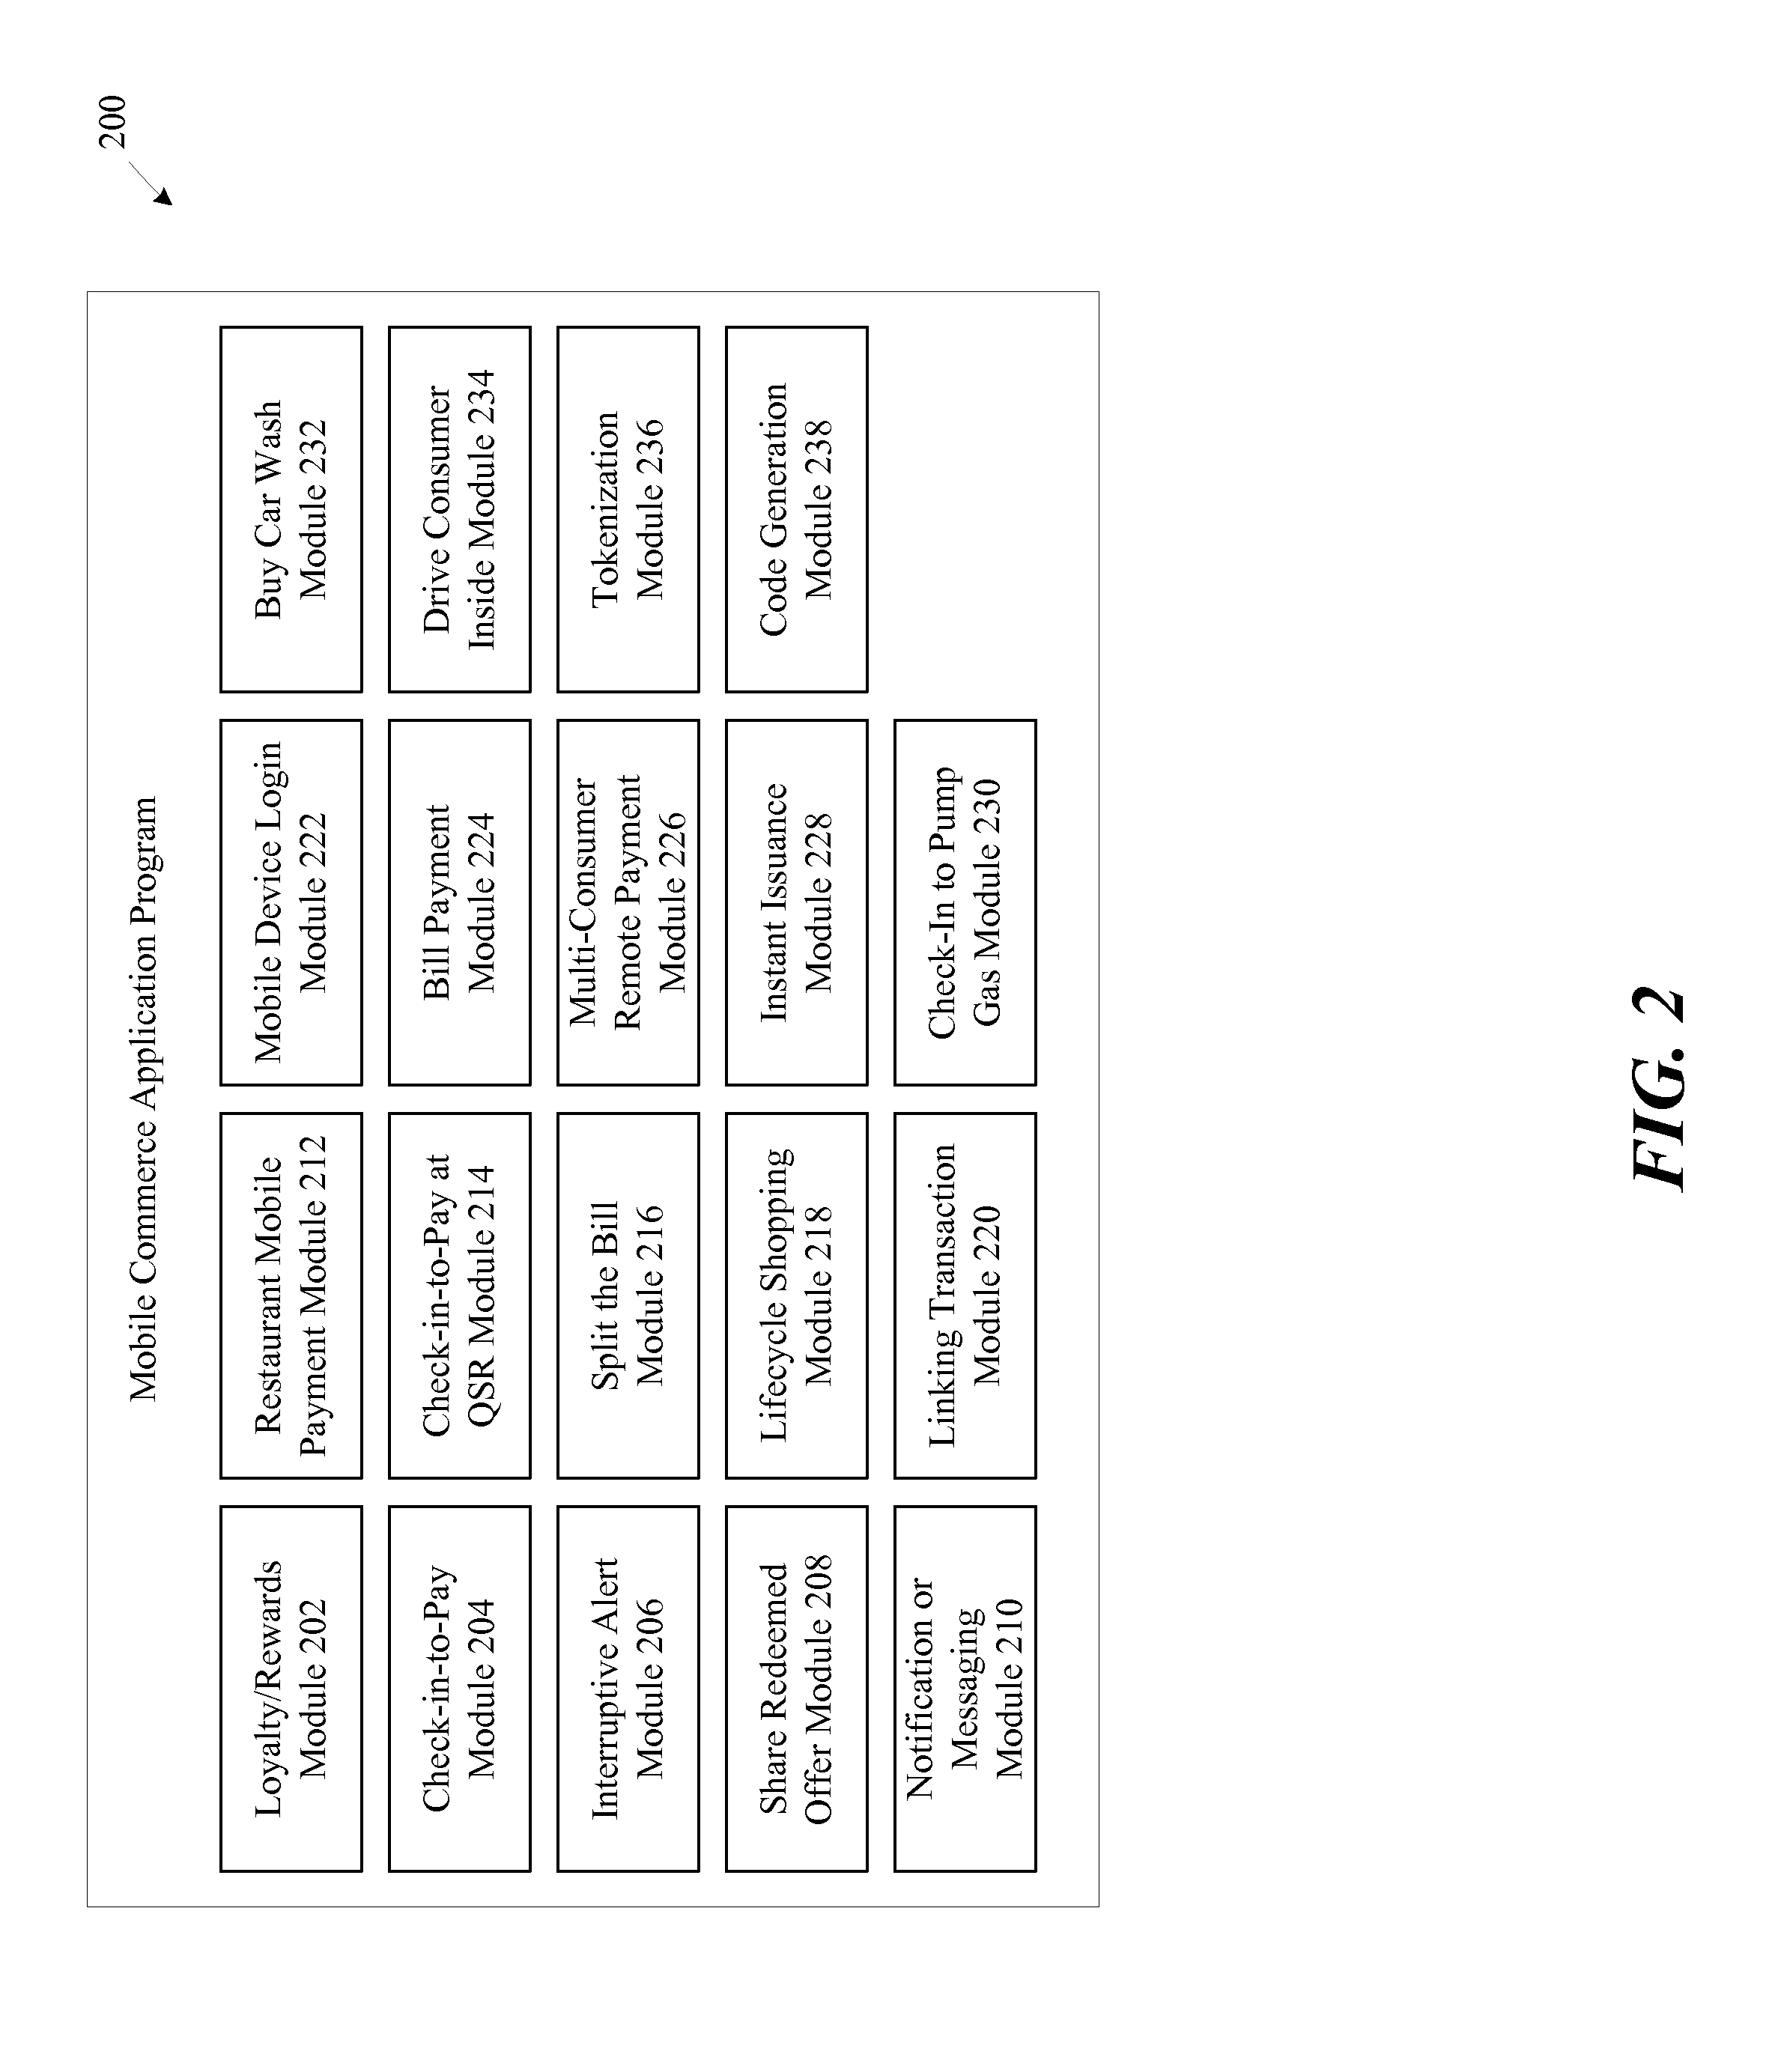 Systems and methods for facilitating the approval and use of a credit account via mobile commerce